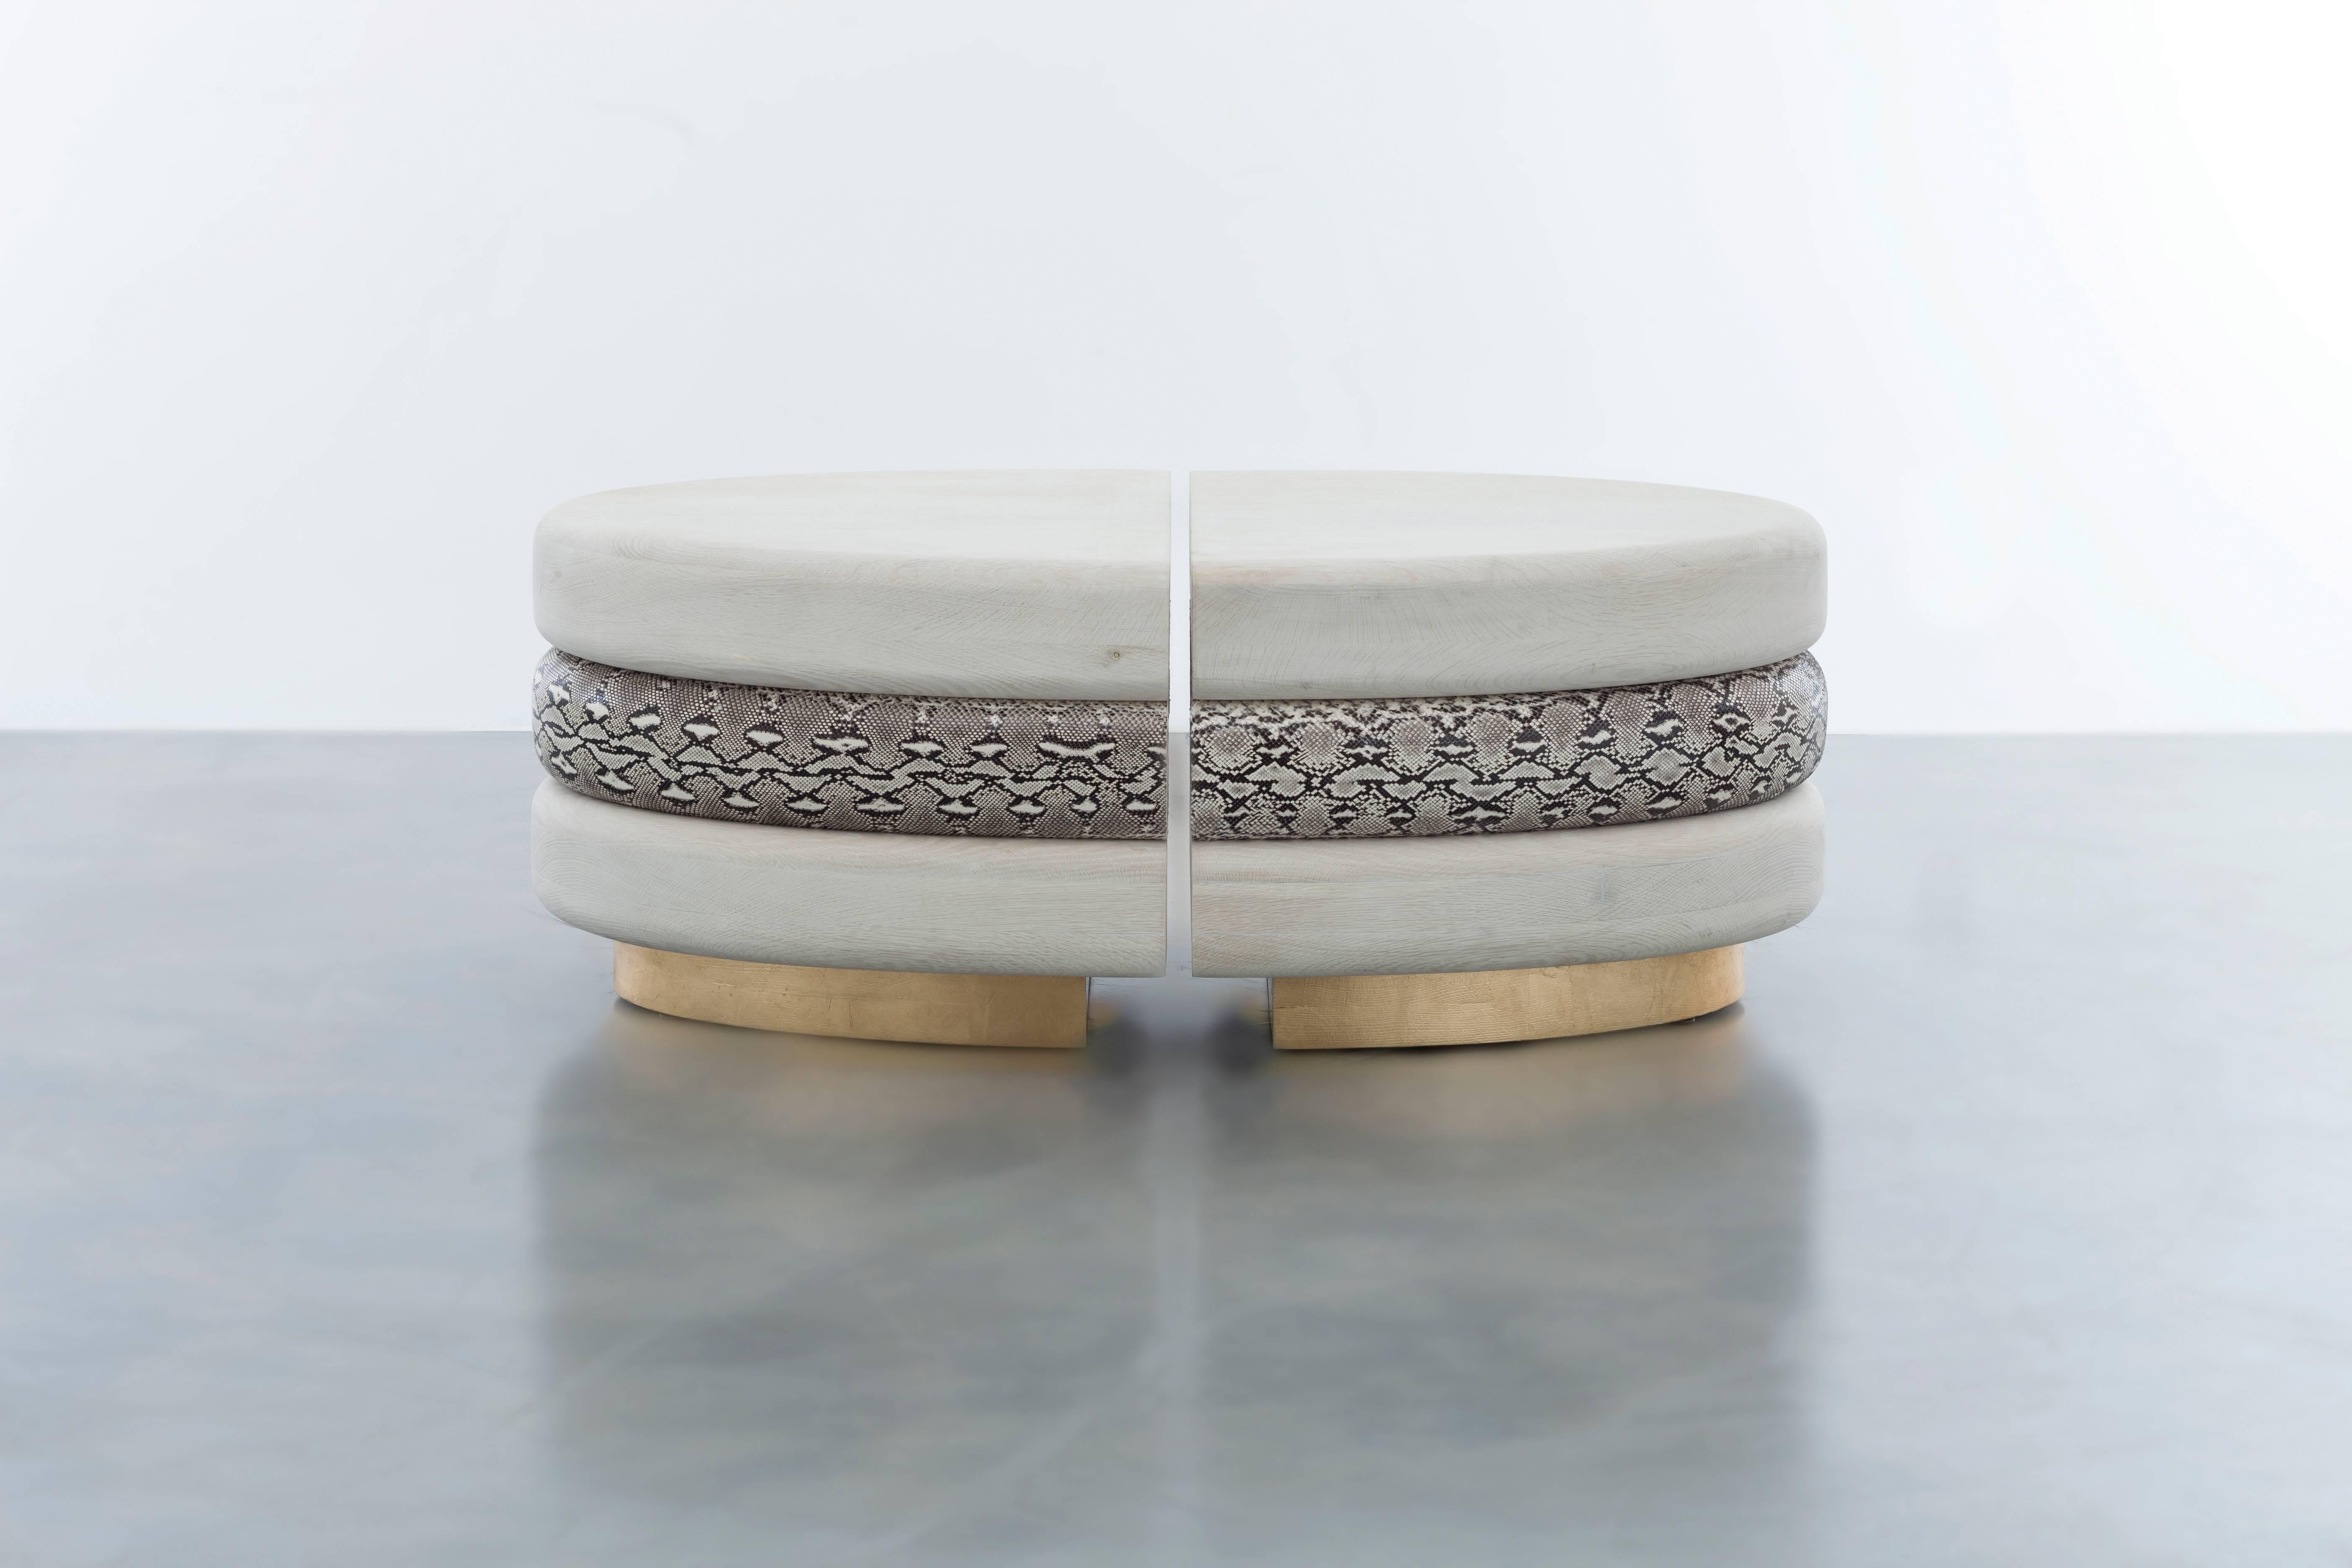 CELINE COFFEE TABLE - Modern Bleached Oak with Real Python Skin and a Gold Base 

The Celine coffee table is a truly unique and luxurious piece of furniture that features layers of hand-carved bullnose white oak and real python skin floating above a